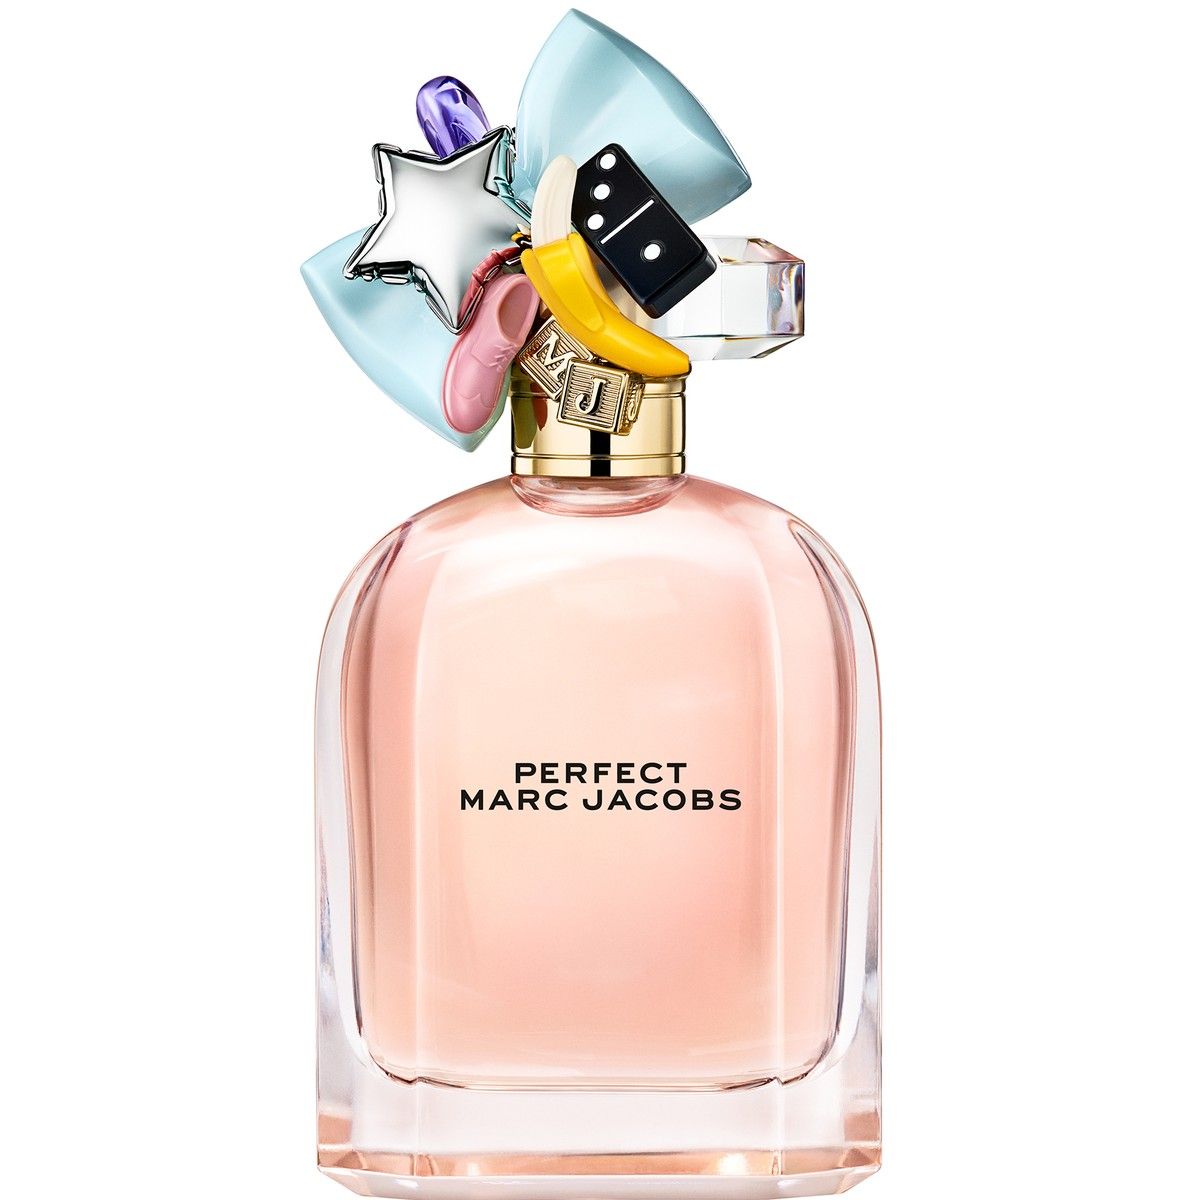 Парфюмерная вода Marc Jacobs Perfect 100 мл